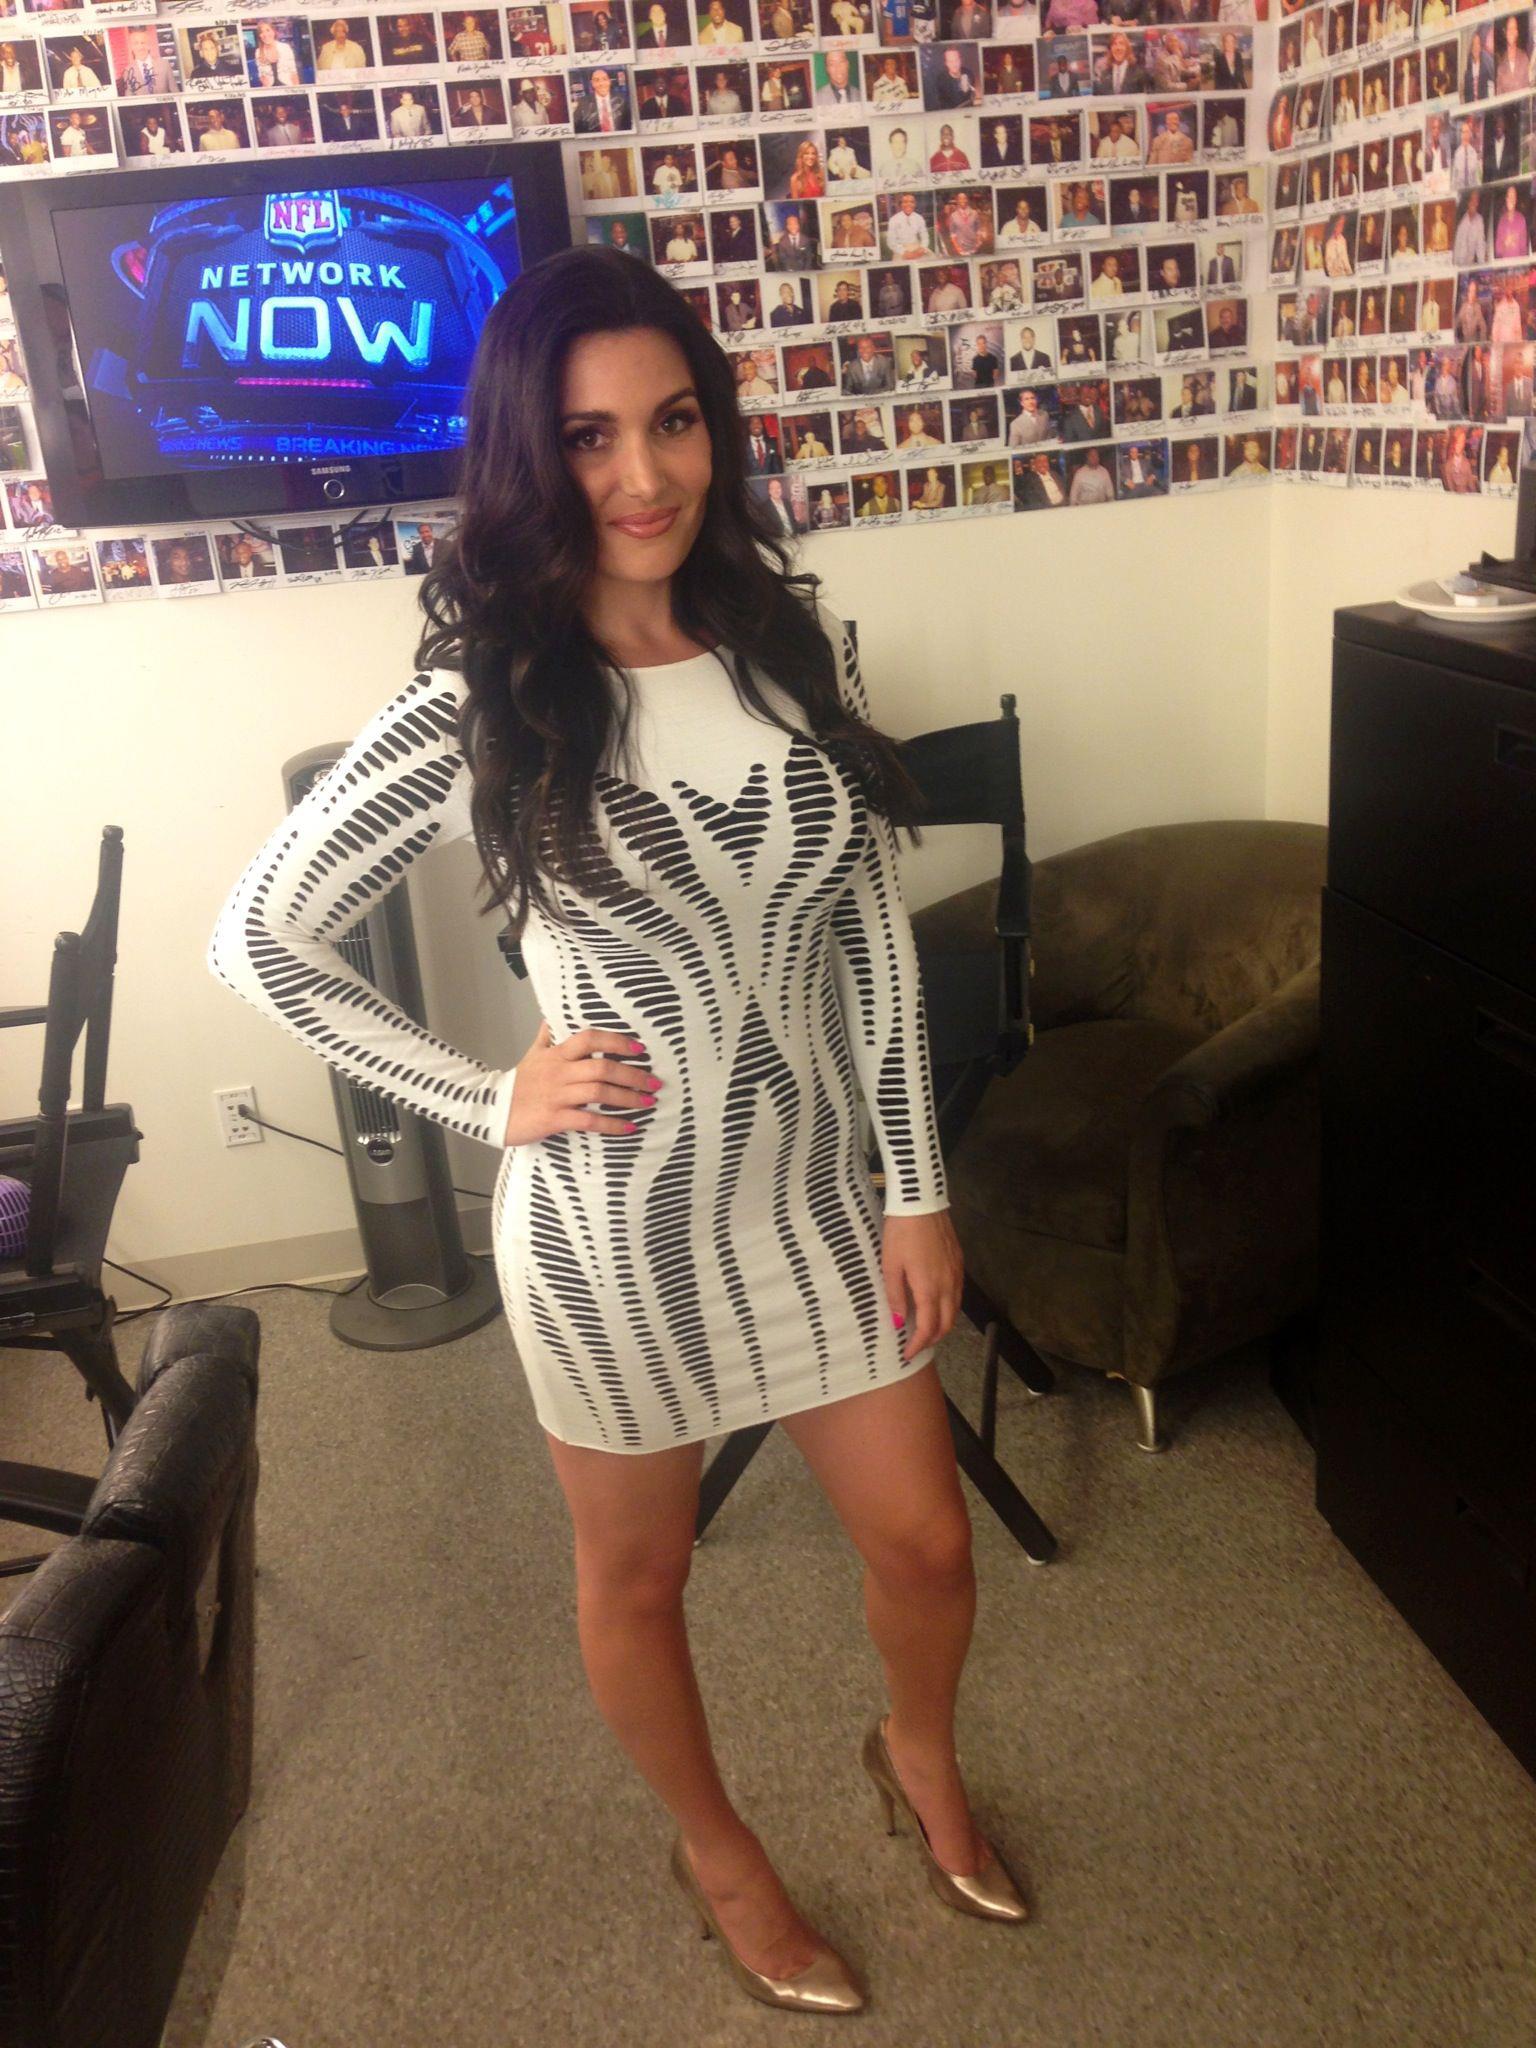 Molly qerim naked pictures